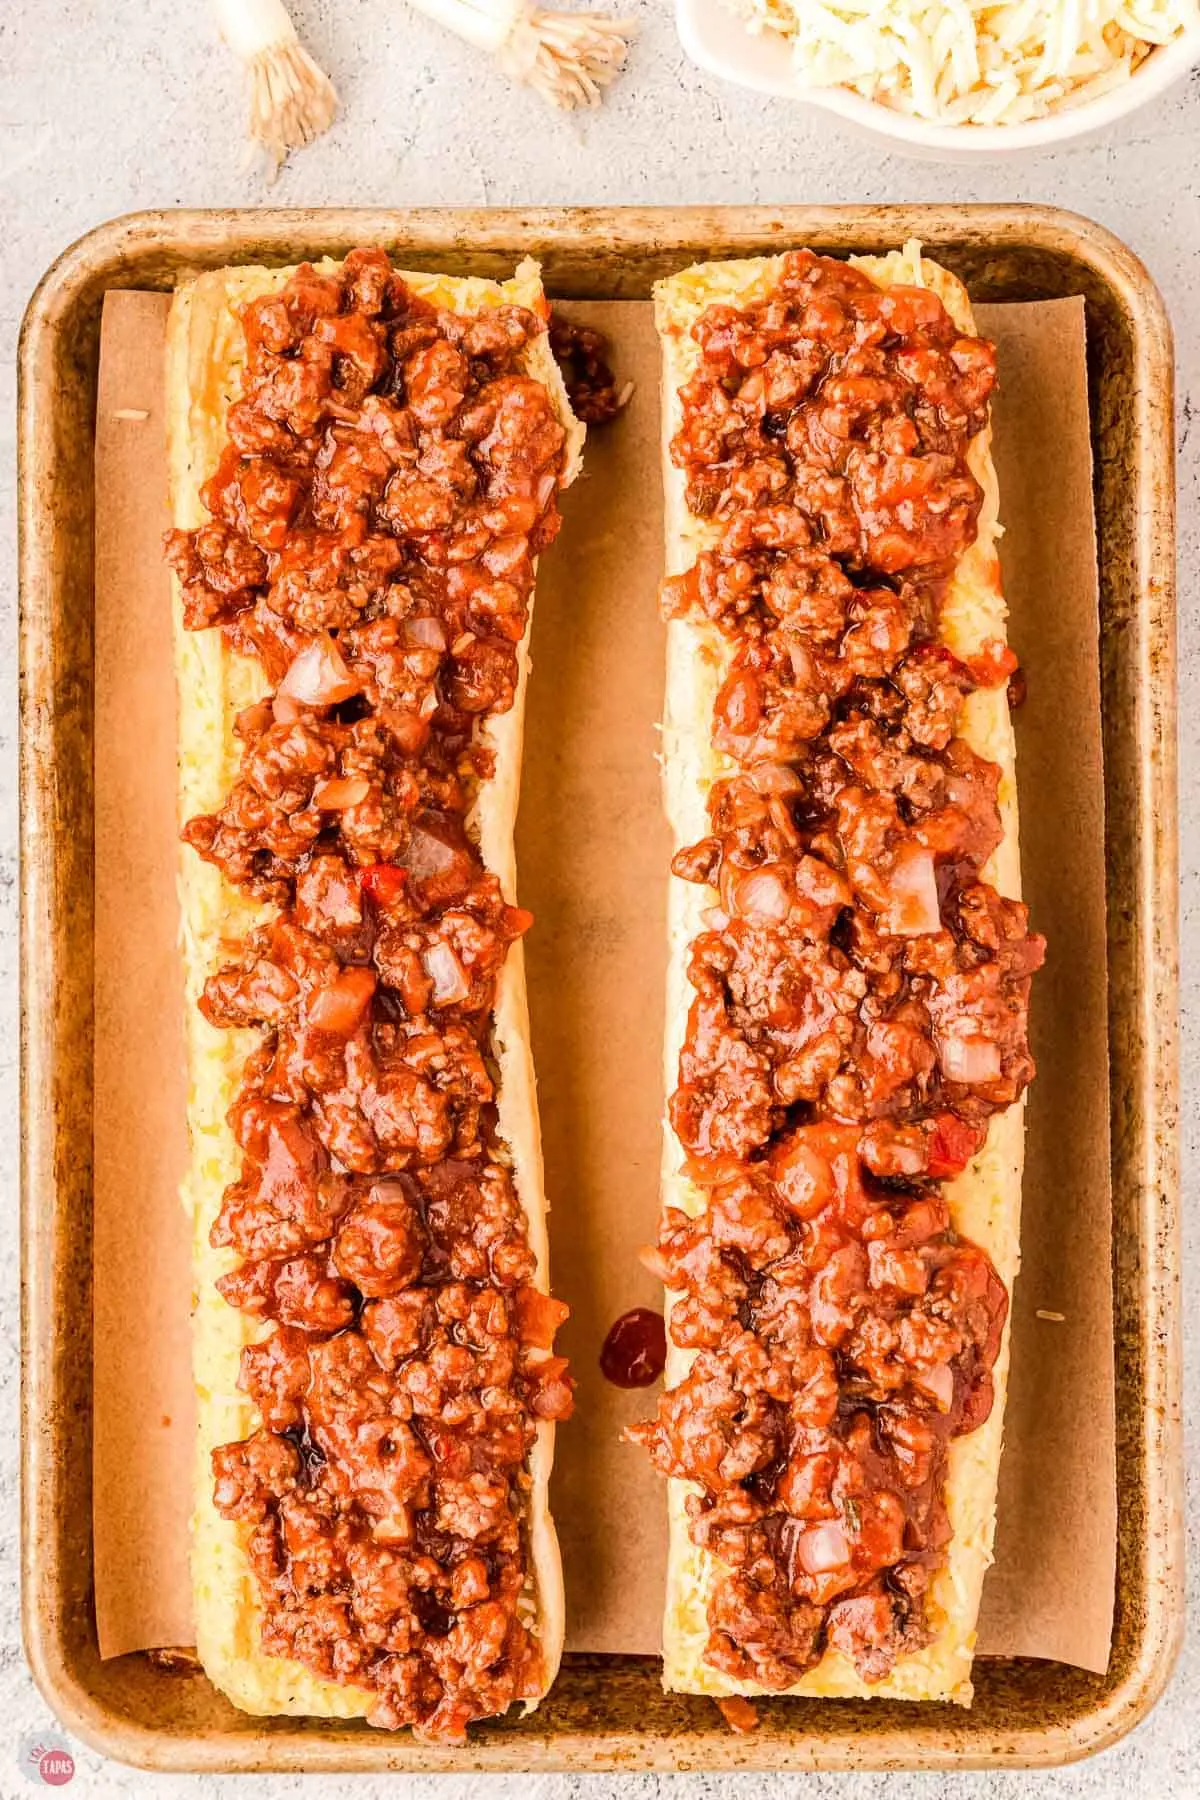 a layer of sloppy joe mixture on top of the garlic bread